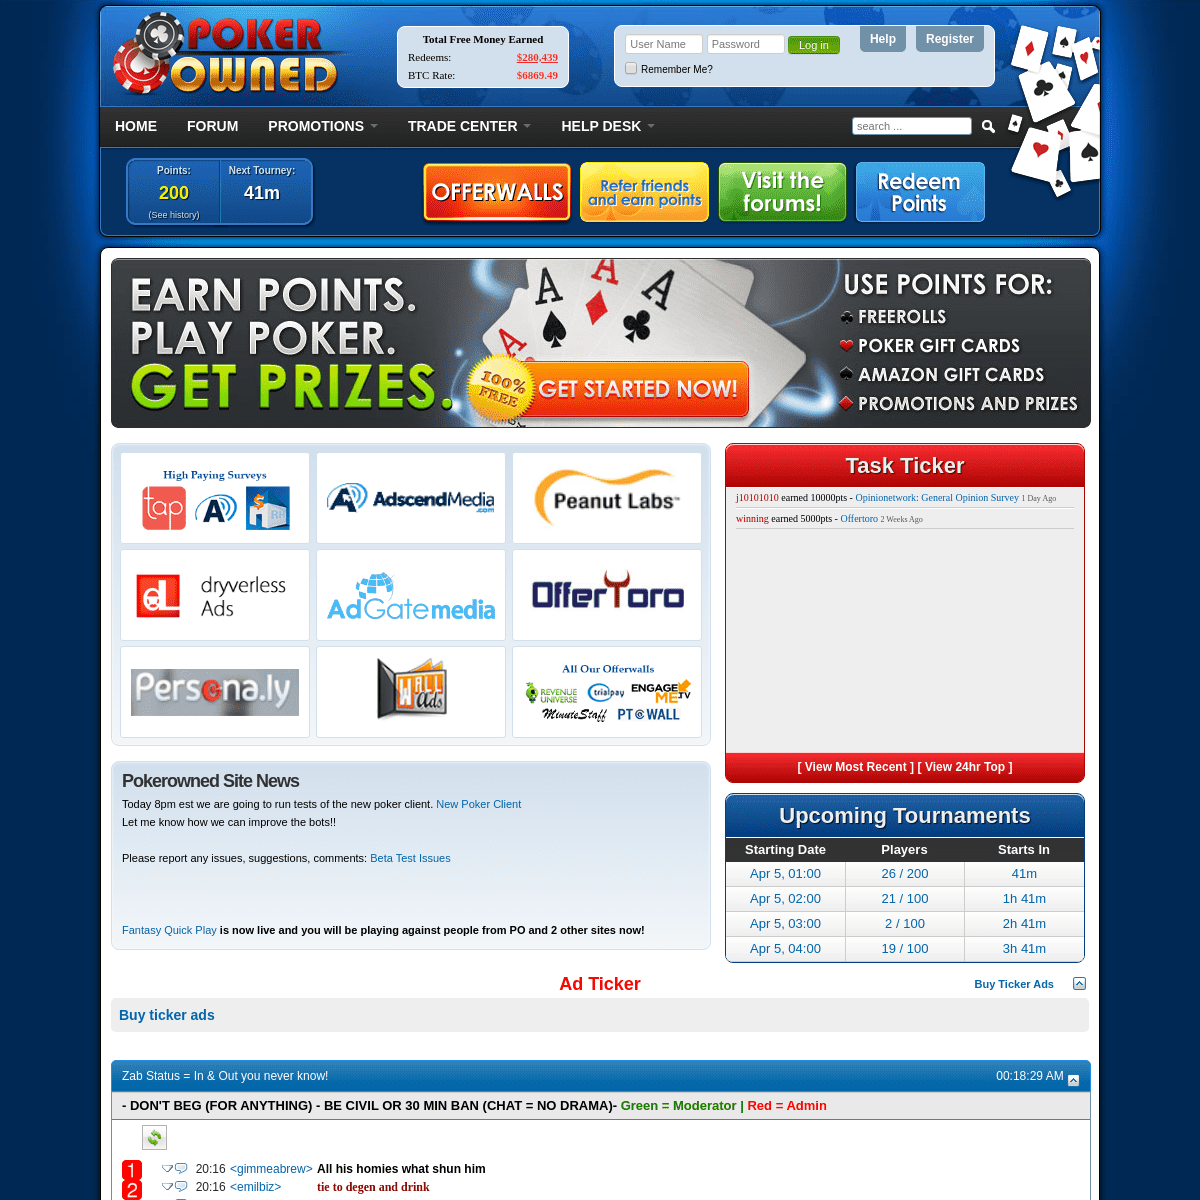 A complete backup of pokerowned.com